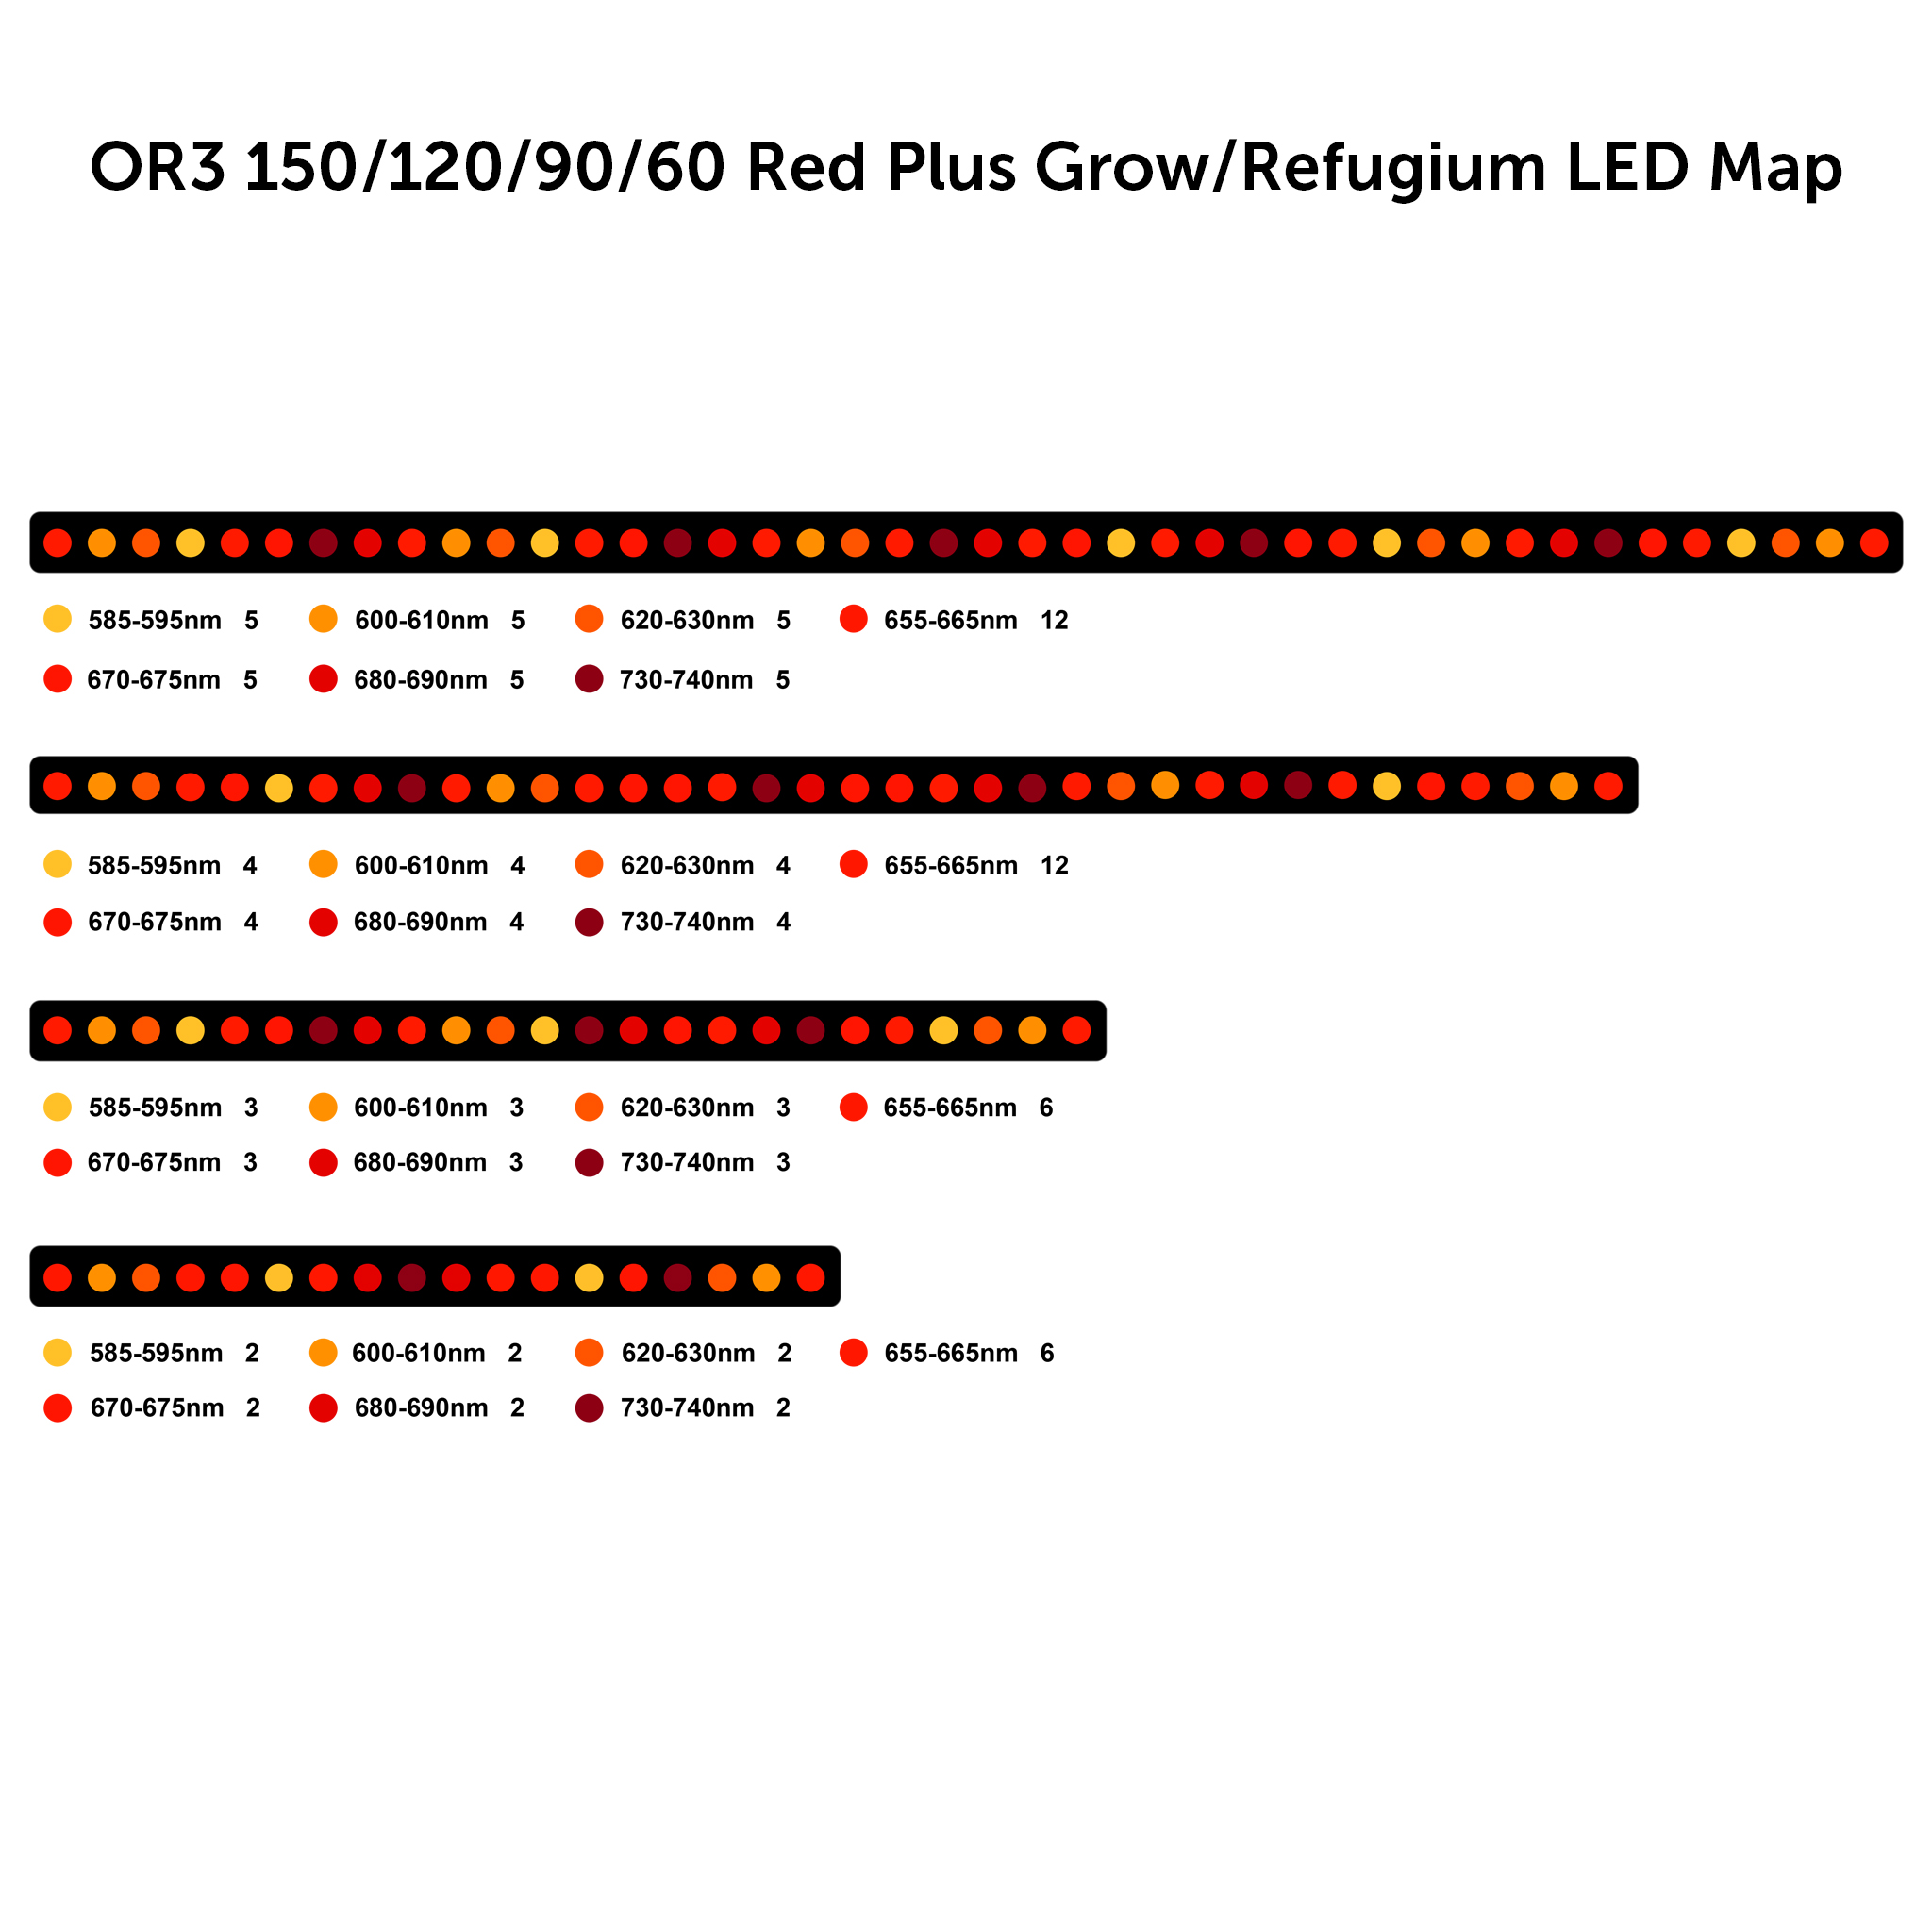 or3-red-plus-grow-refugium-led-mappa